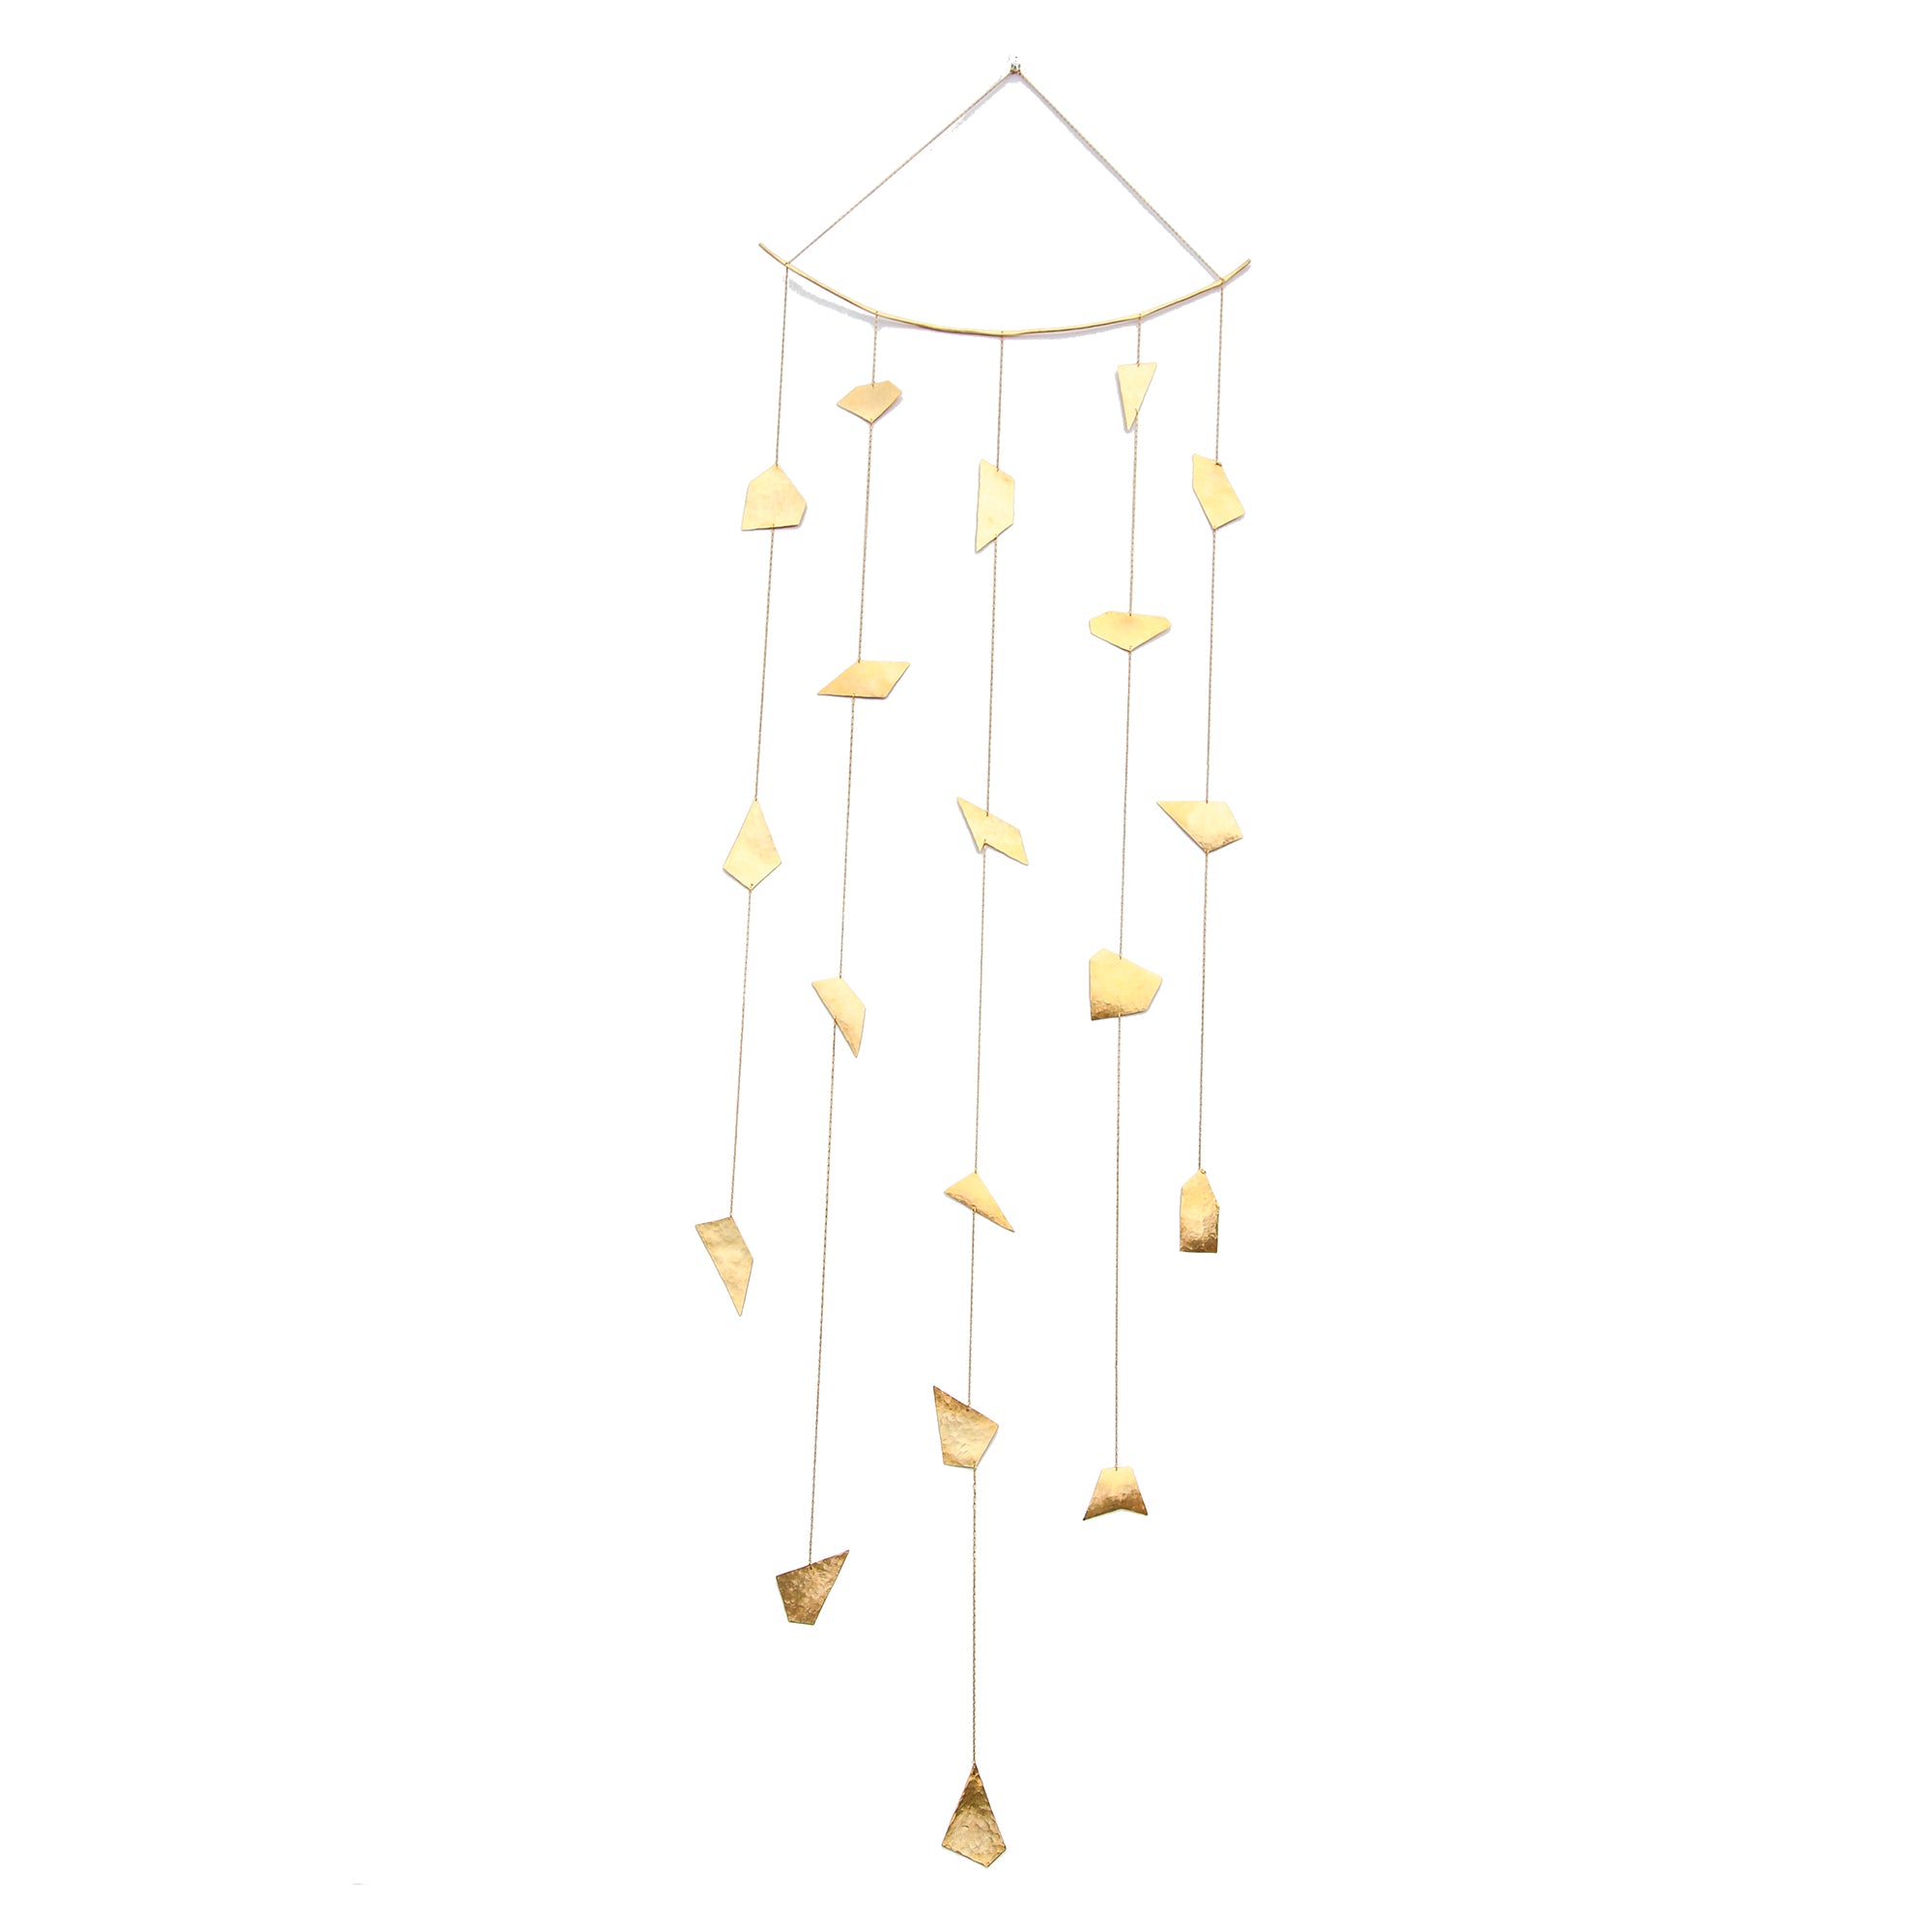 The Organic 5 Strand Mobile features organic hand-cut and forged brass sheet and wire with vintage brass chain. 